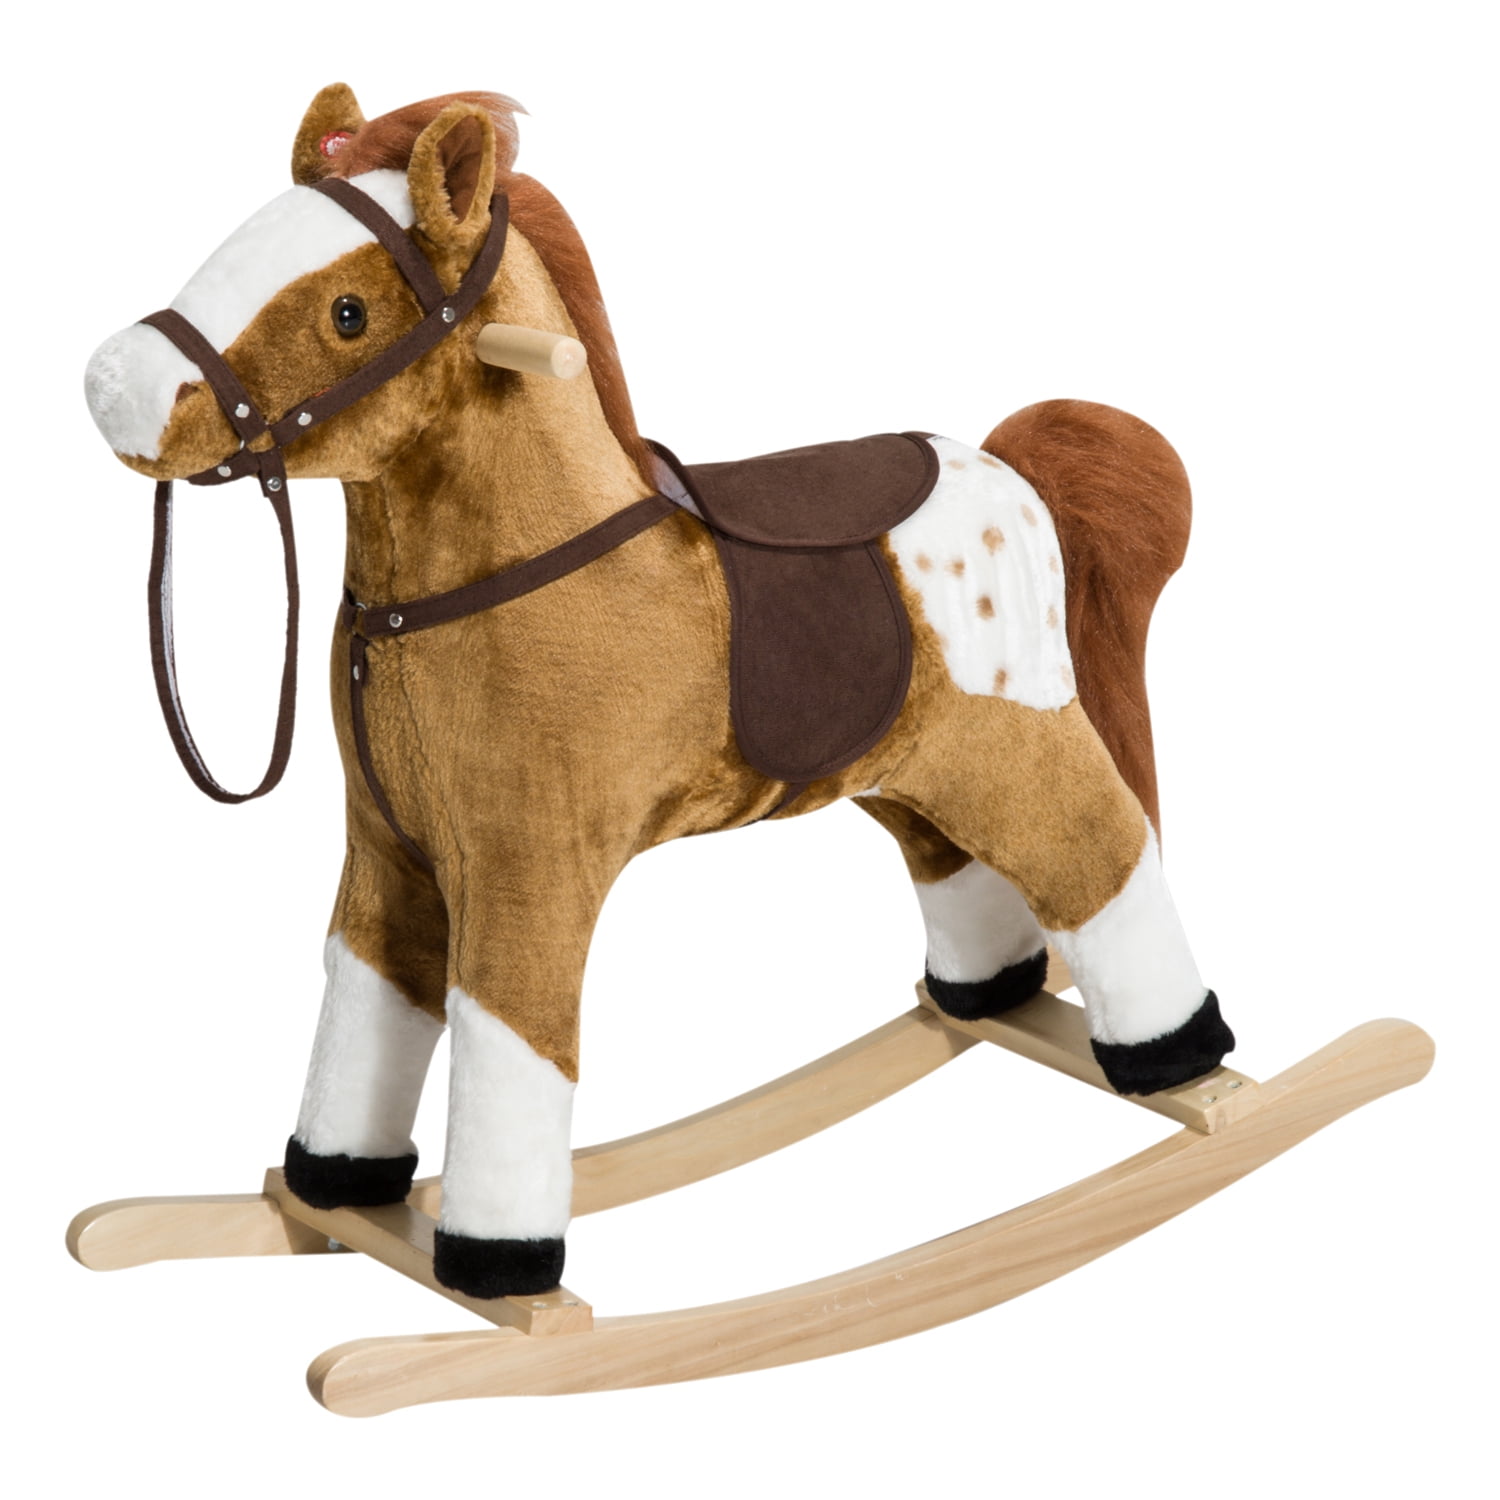 Kinbor Kids Plush Rocking Horse Animal Ride on Toy with Brown dog character